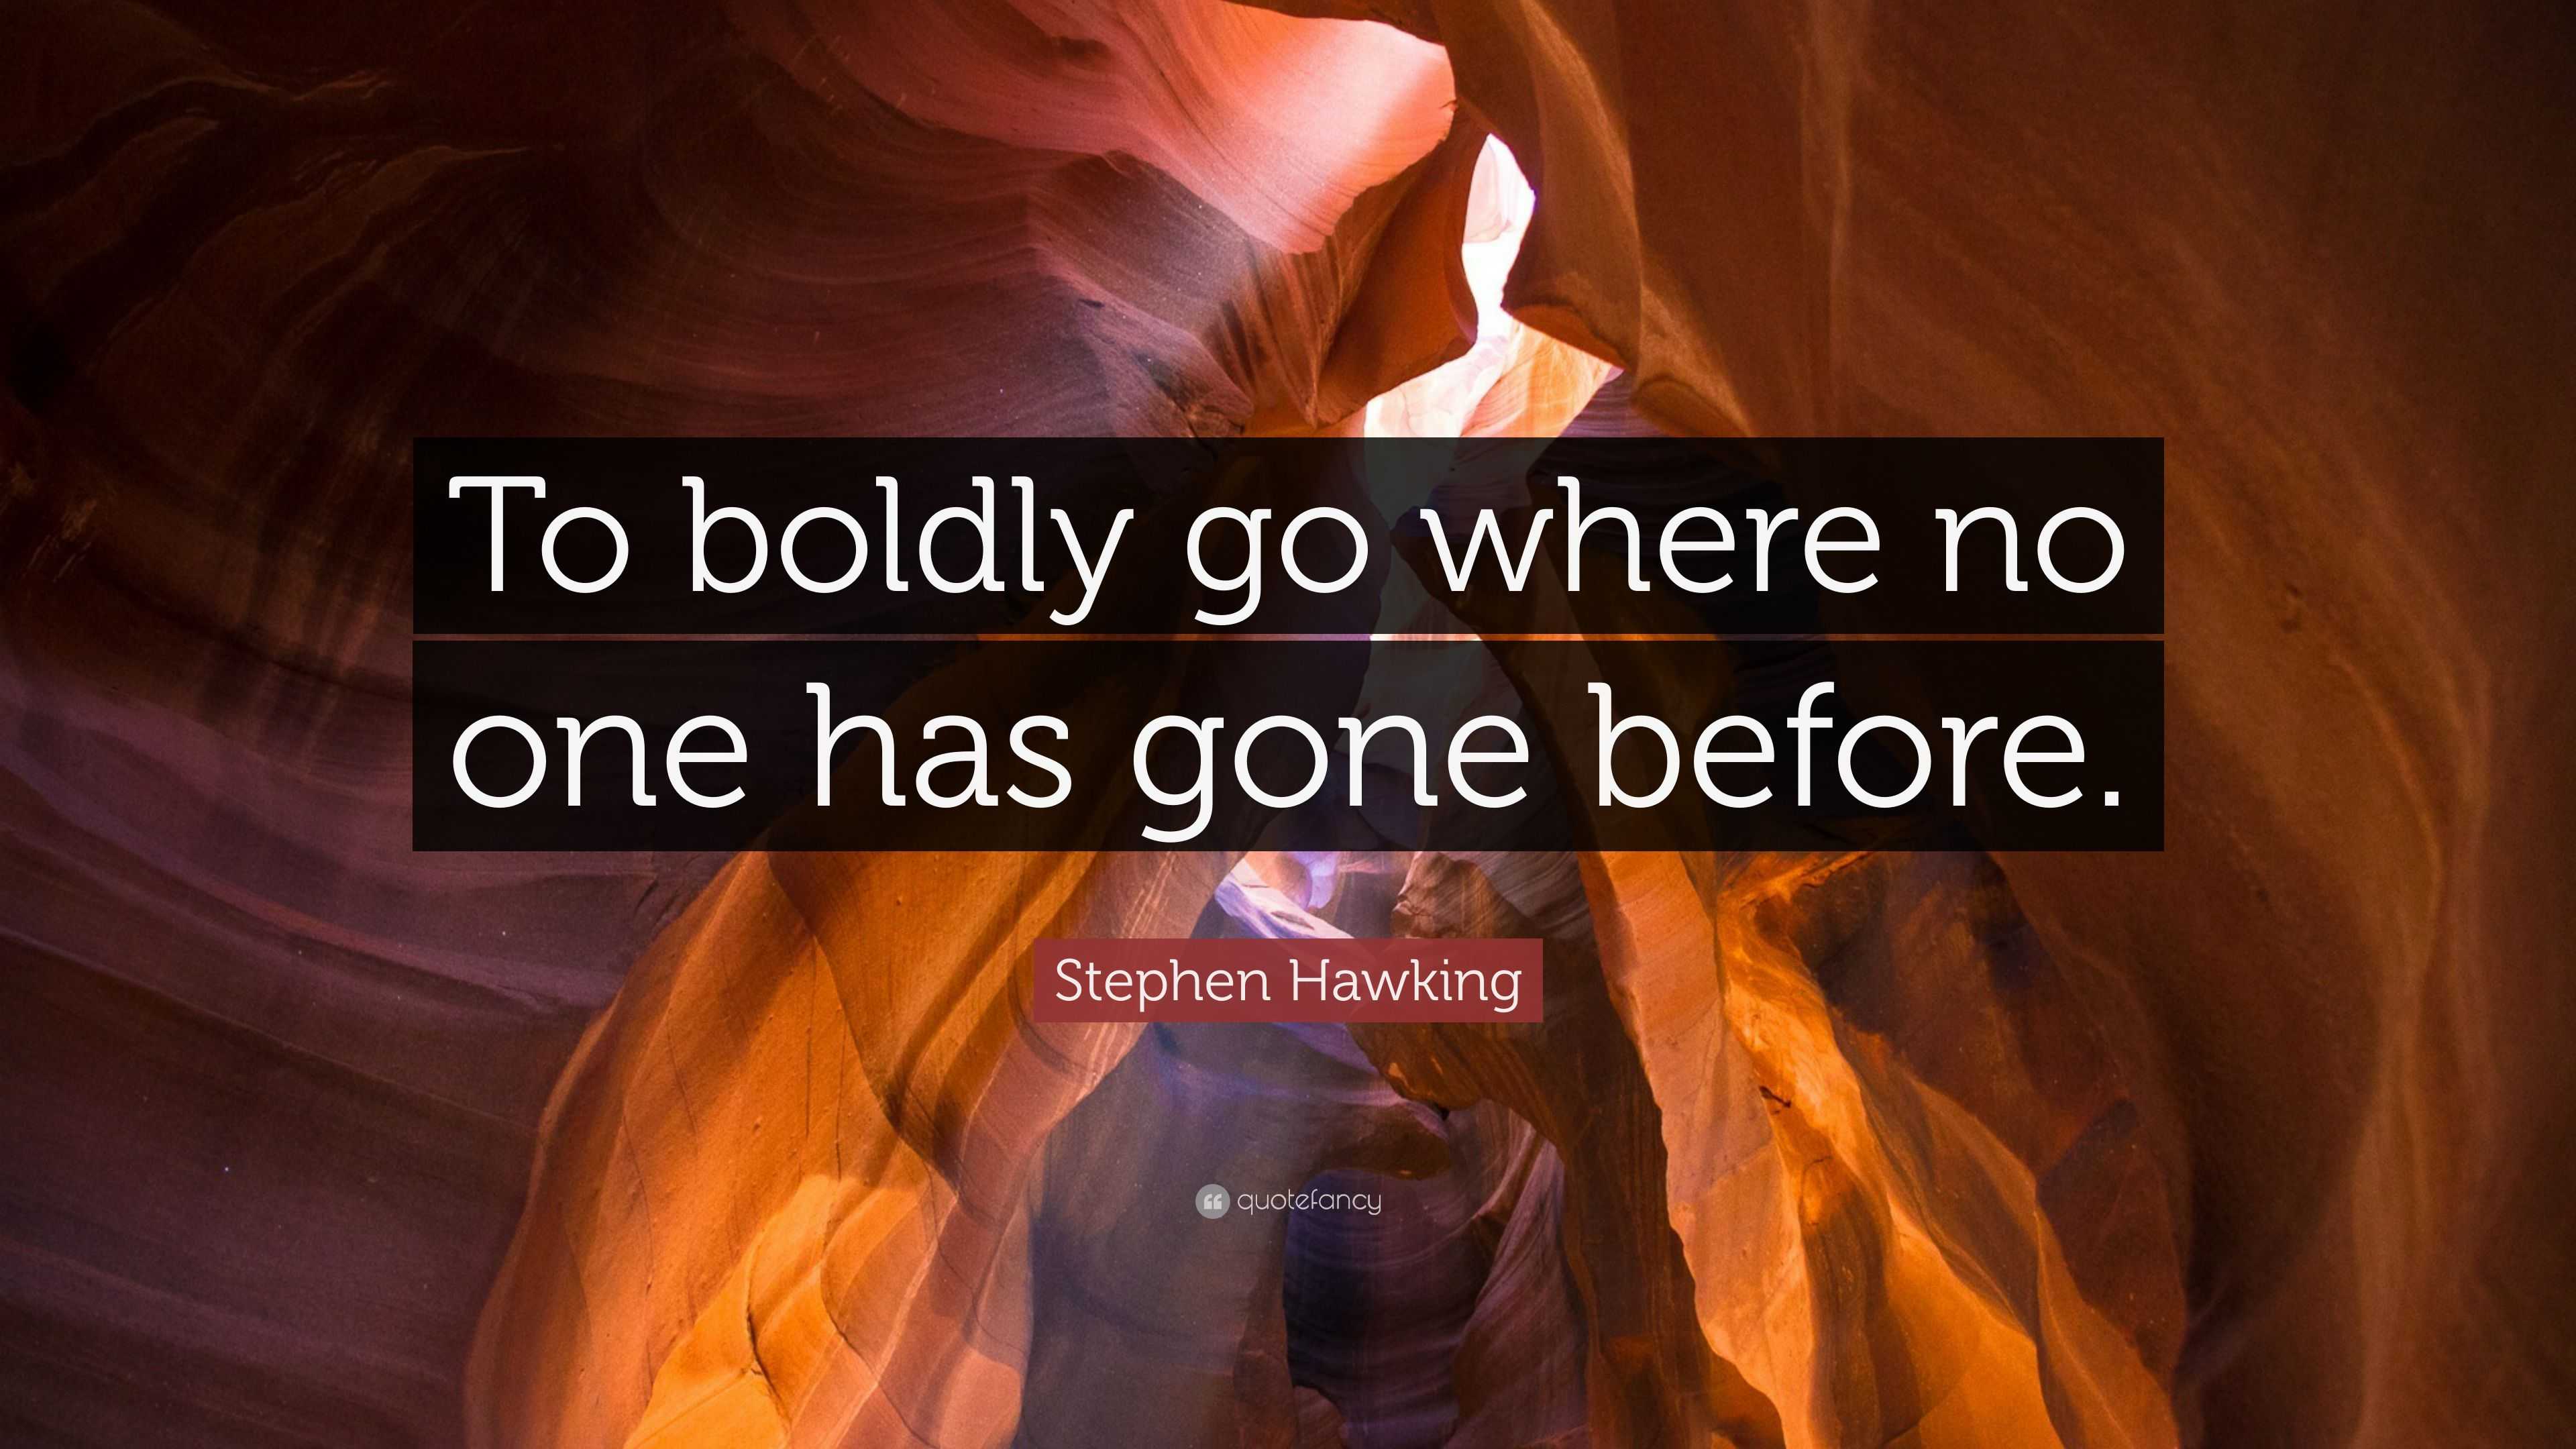 Stephen Hawking Quote “to Boldly Go Where No One Has Gone Before” 5024